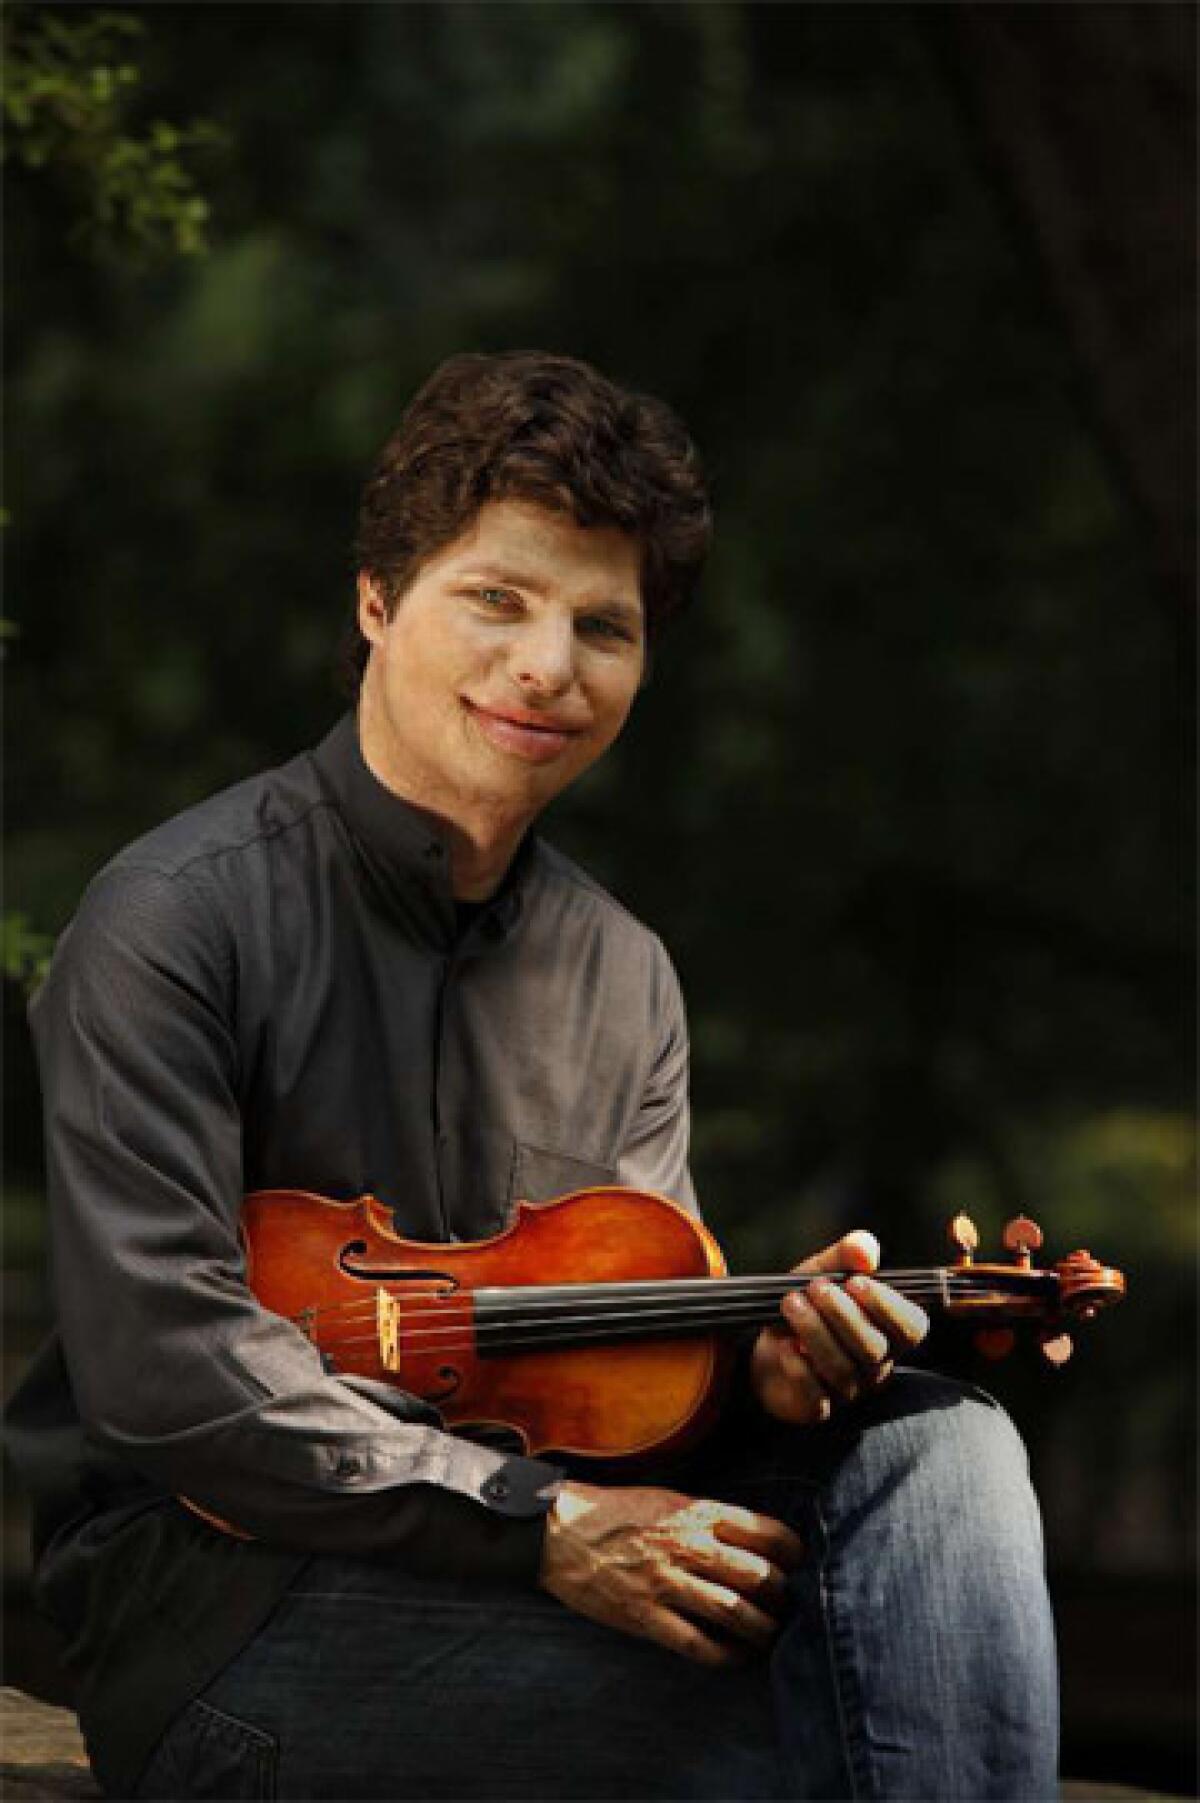 Augustin Hadelich gave a masterly performance of the Beethoven concerto.